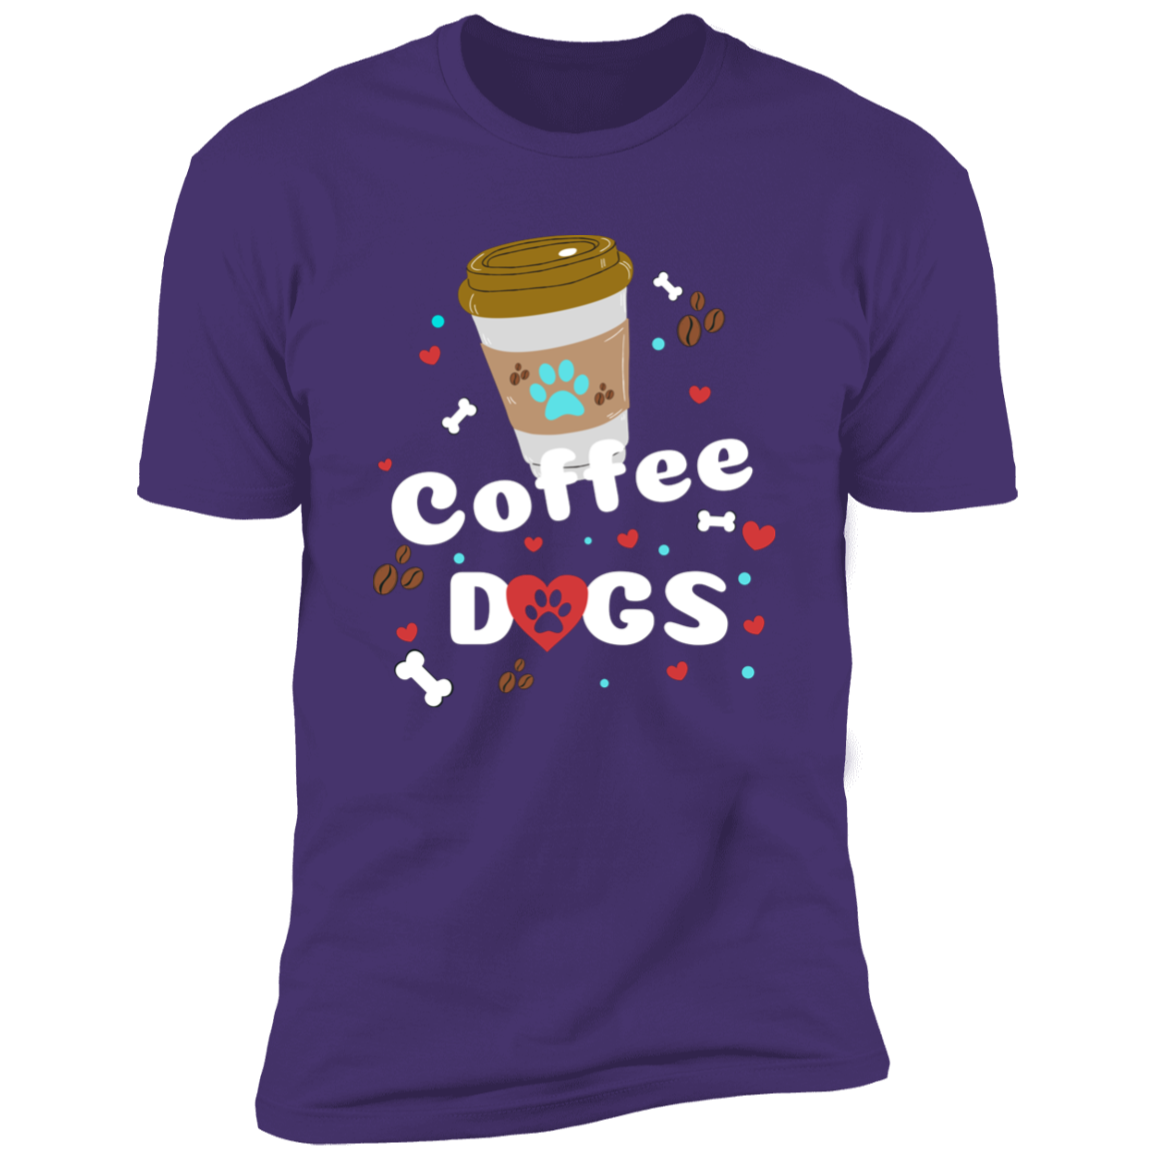 To go Coffee Dogs T-shirt, Dog Shirt for humans, purple rush